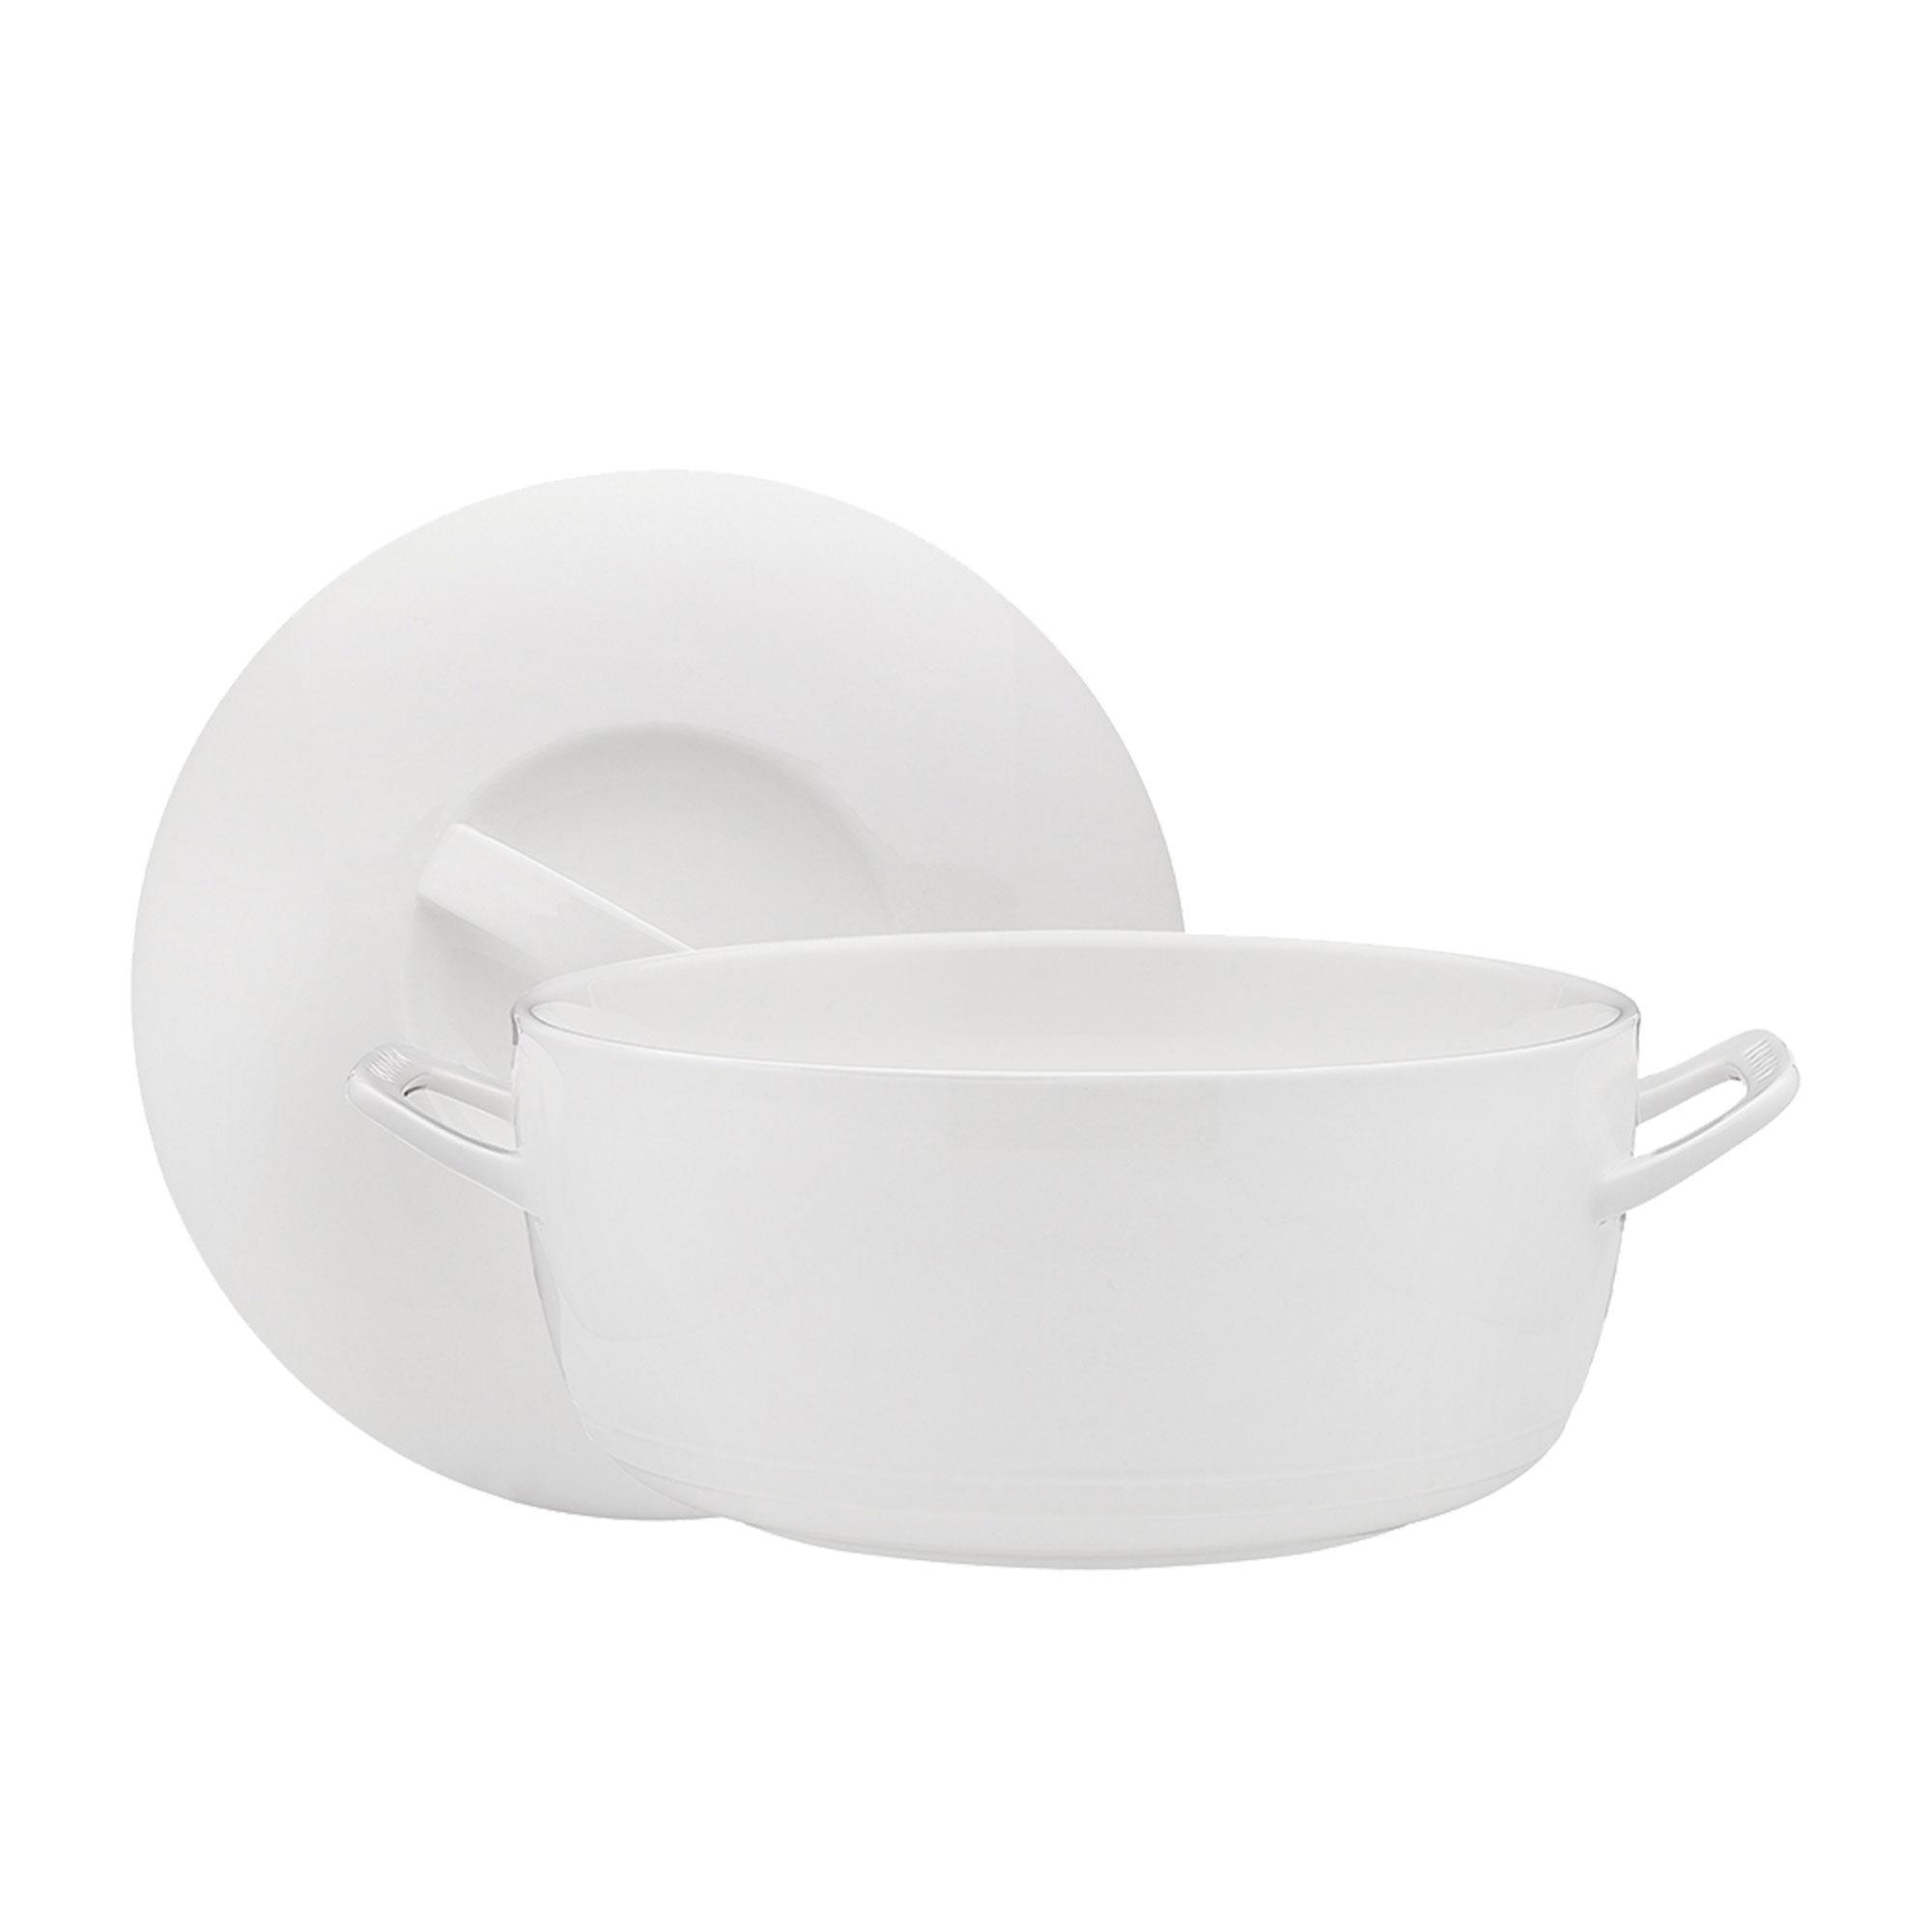 Ecology Signature Casserole with Lid 3.5L White Image 2